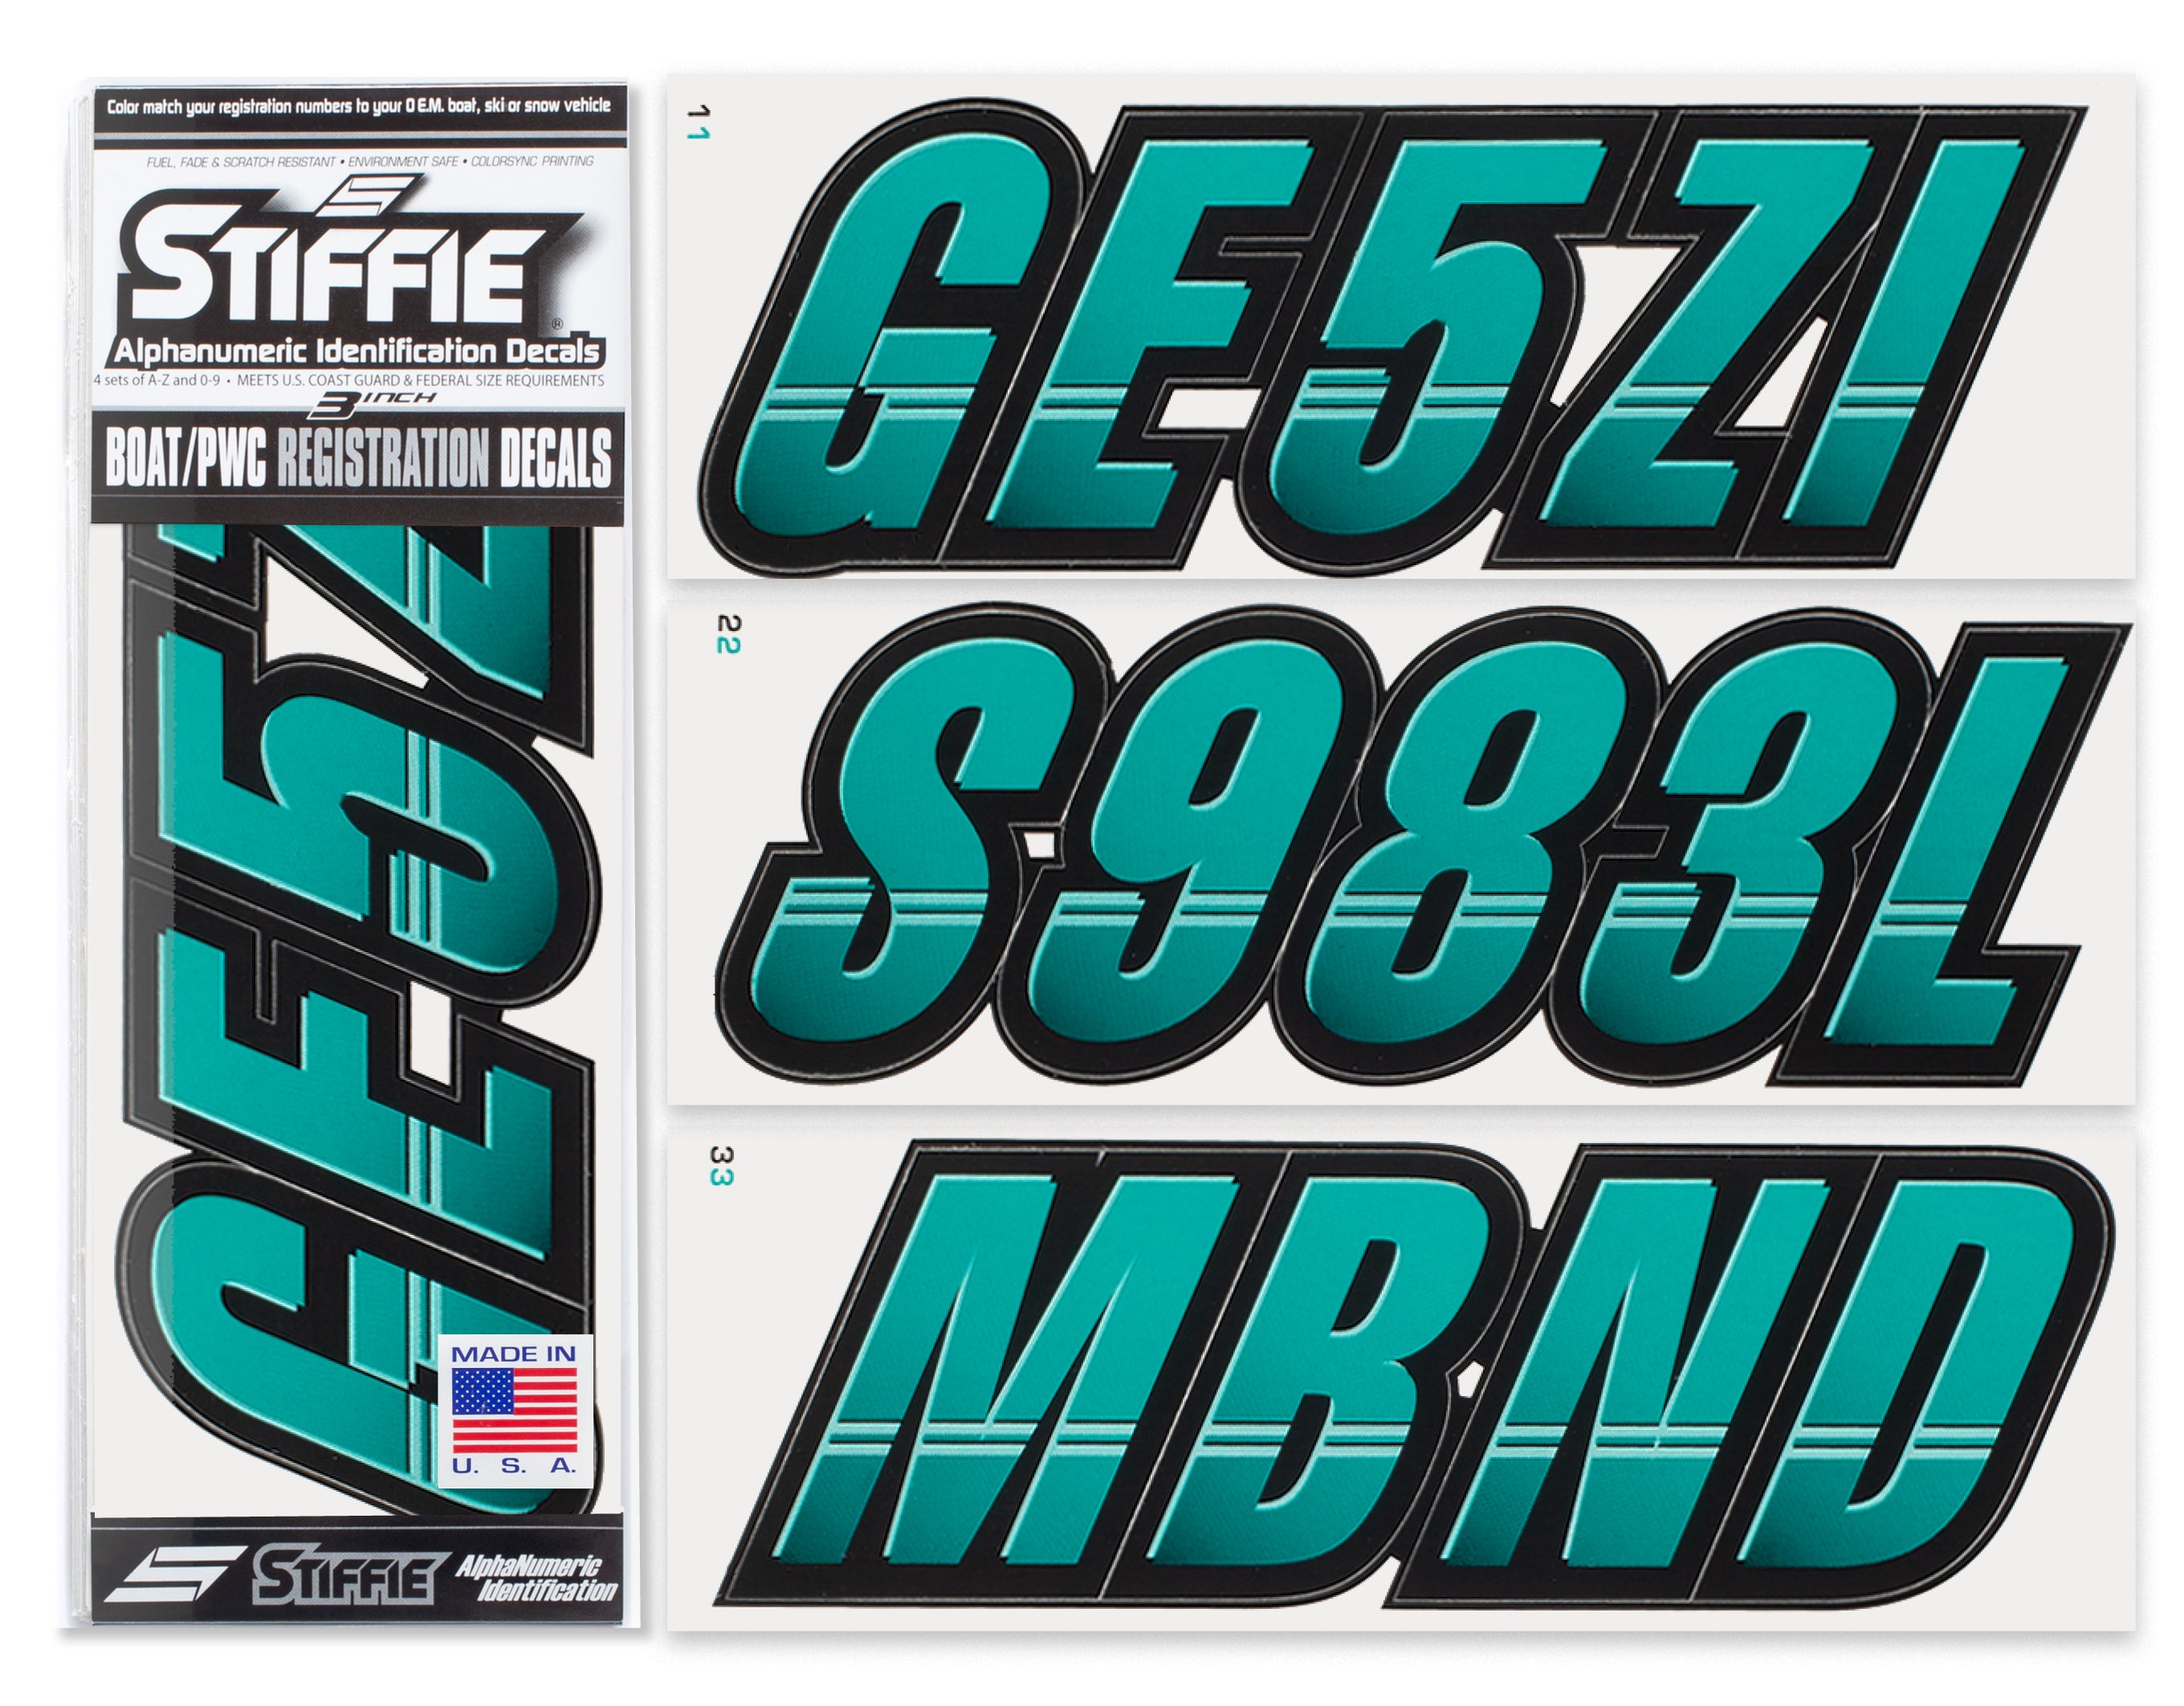 Stiffie TECHTRON Sea Teal / Black 3" Alpha-Numeric Registration Identification Numbers Stickers Decals for Boats & Personal Watercraft